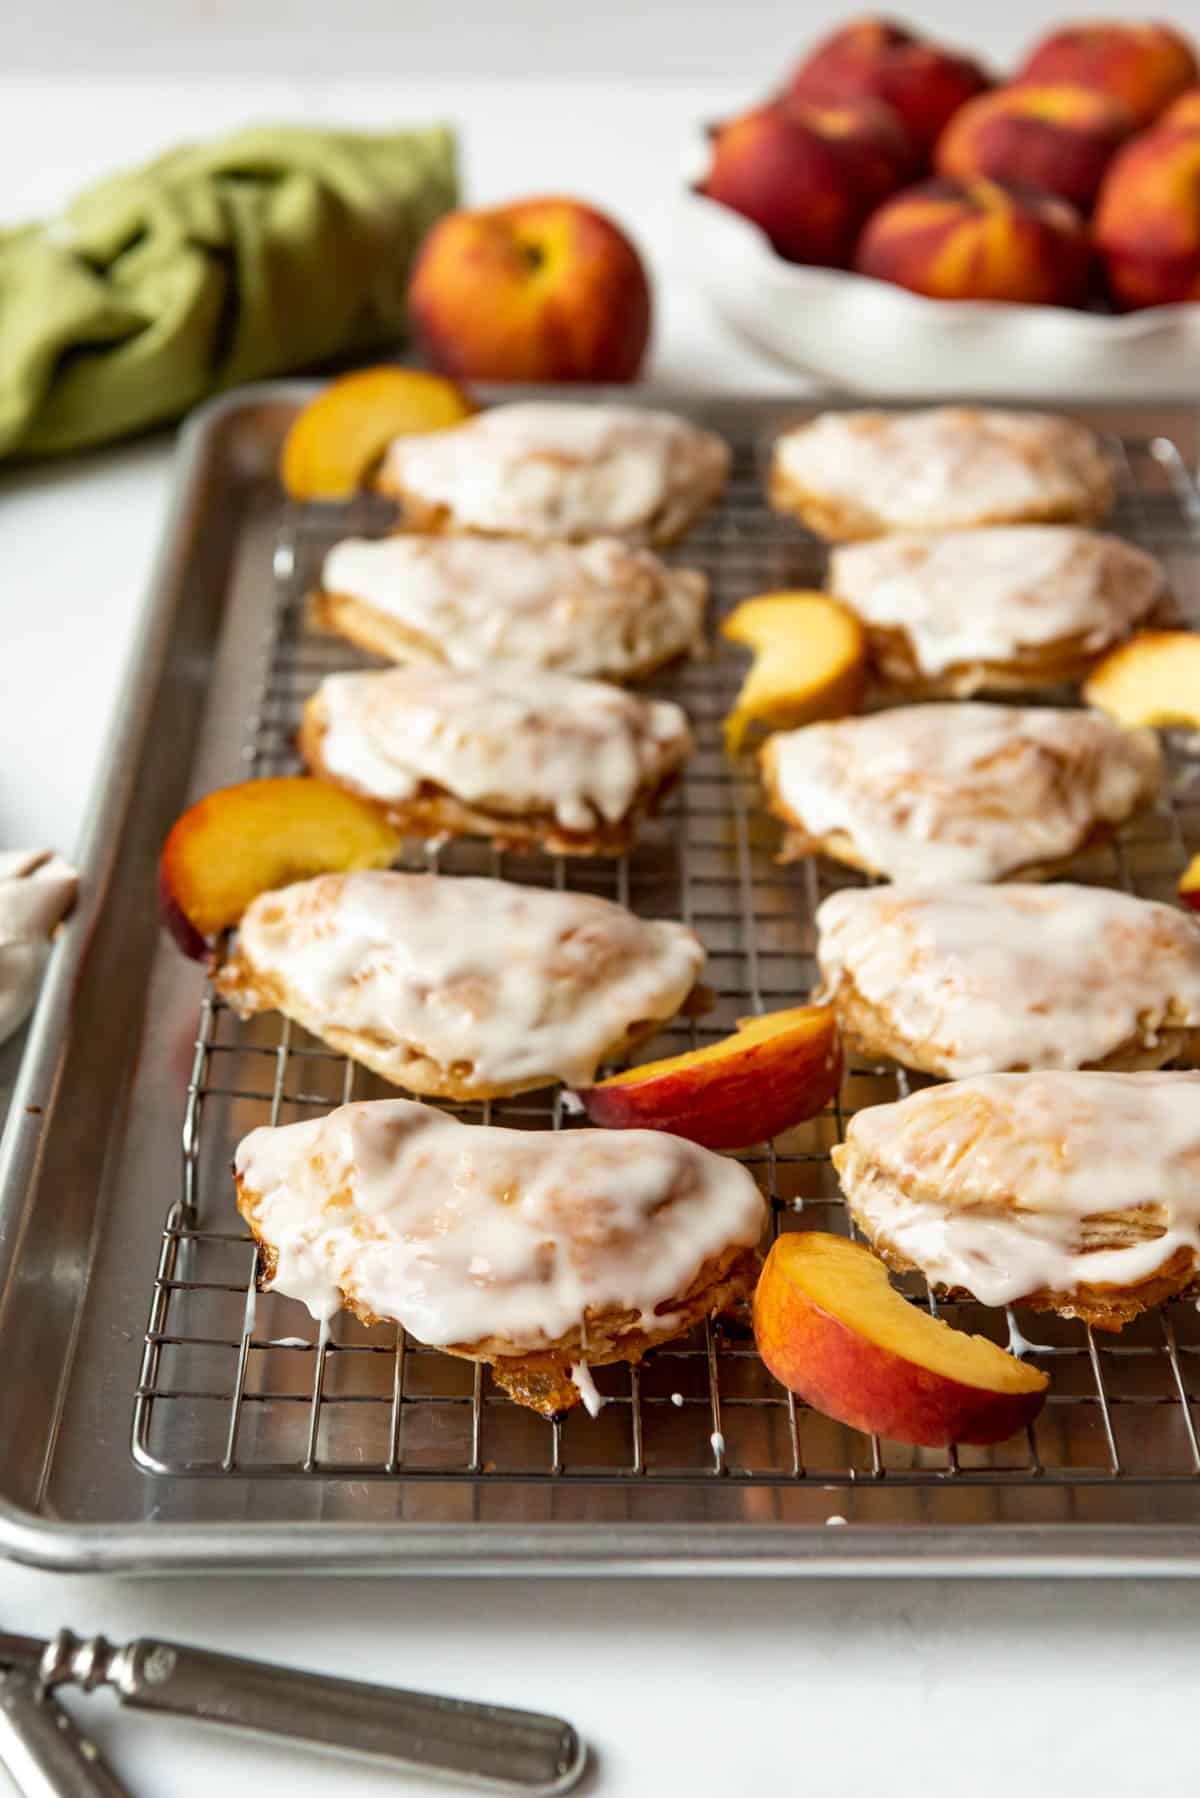 Homemade peach hand pies with vanilla glaze on a wire rack over a baking sheet.